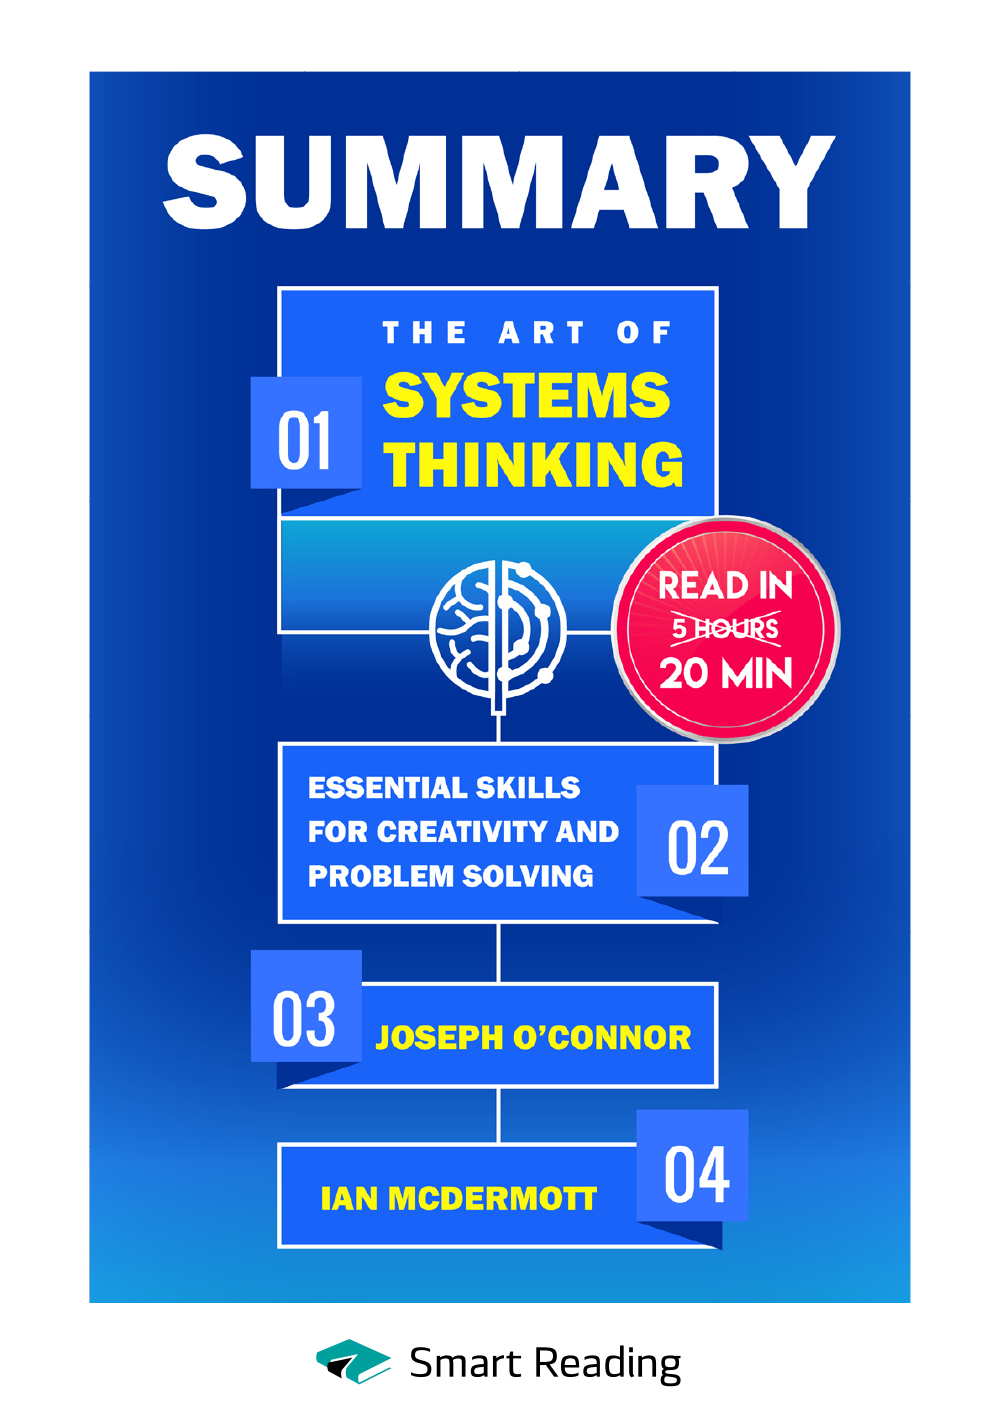 Summary: The Art of Systems Thinking. Essential Skills for Creativity and Problem Solving. Joseph O’Connor, Ian McDermott